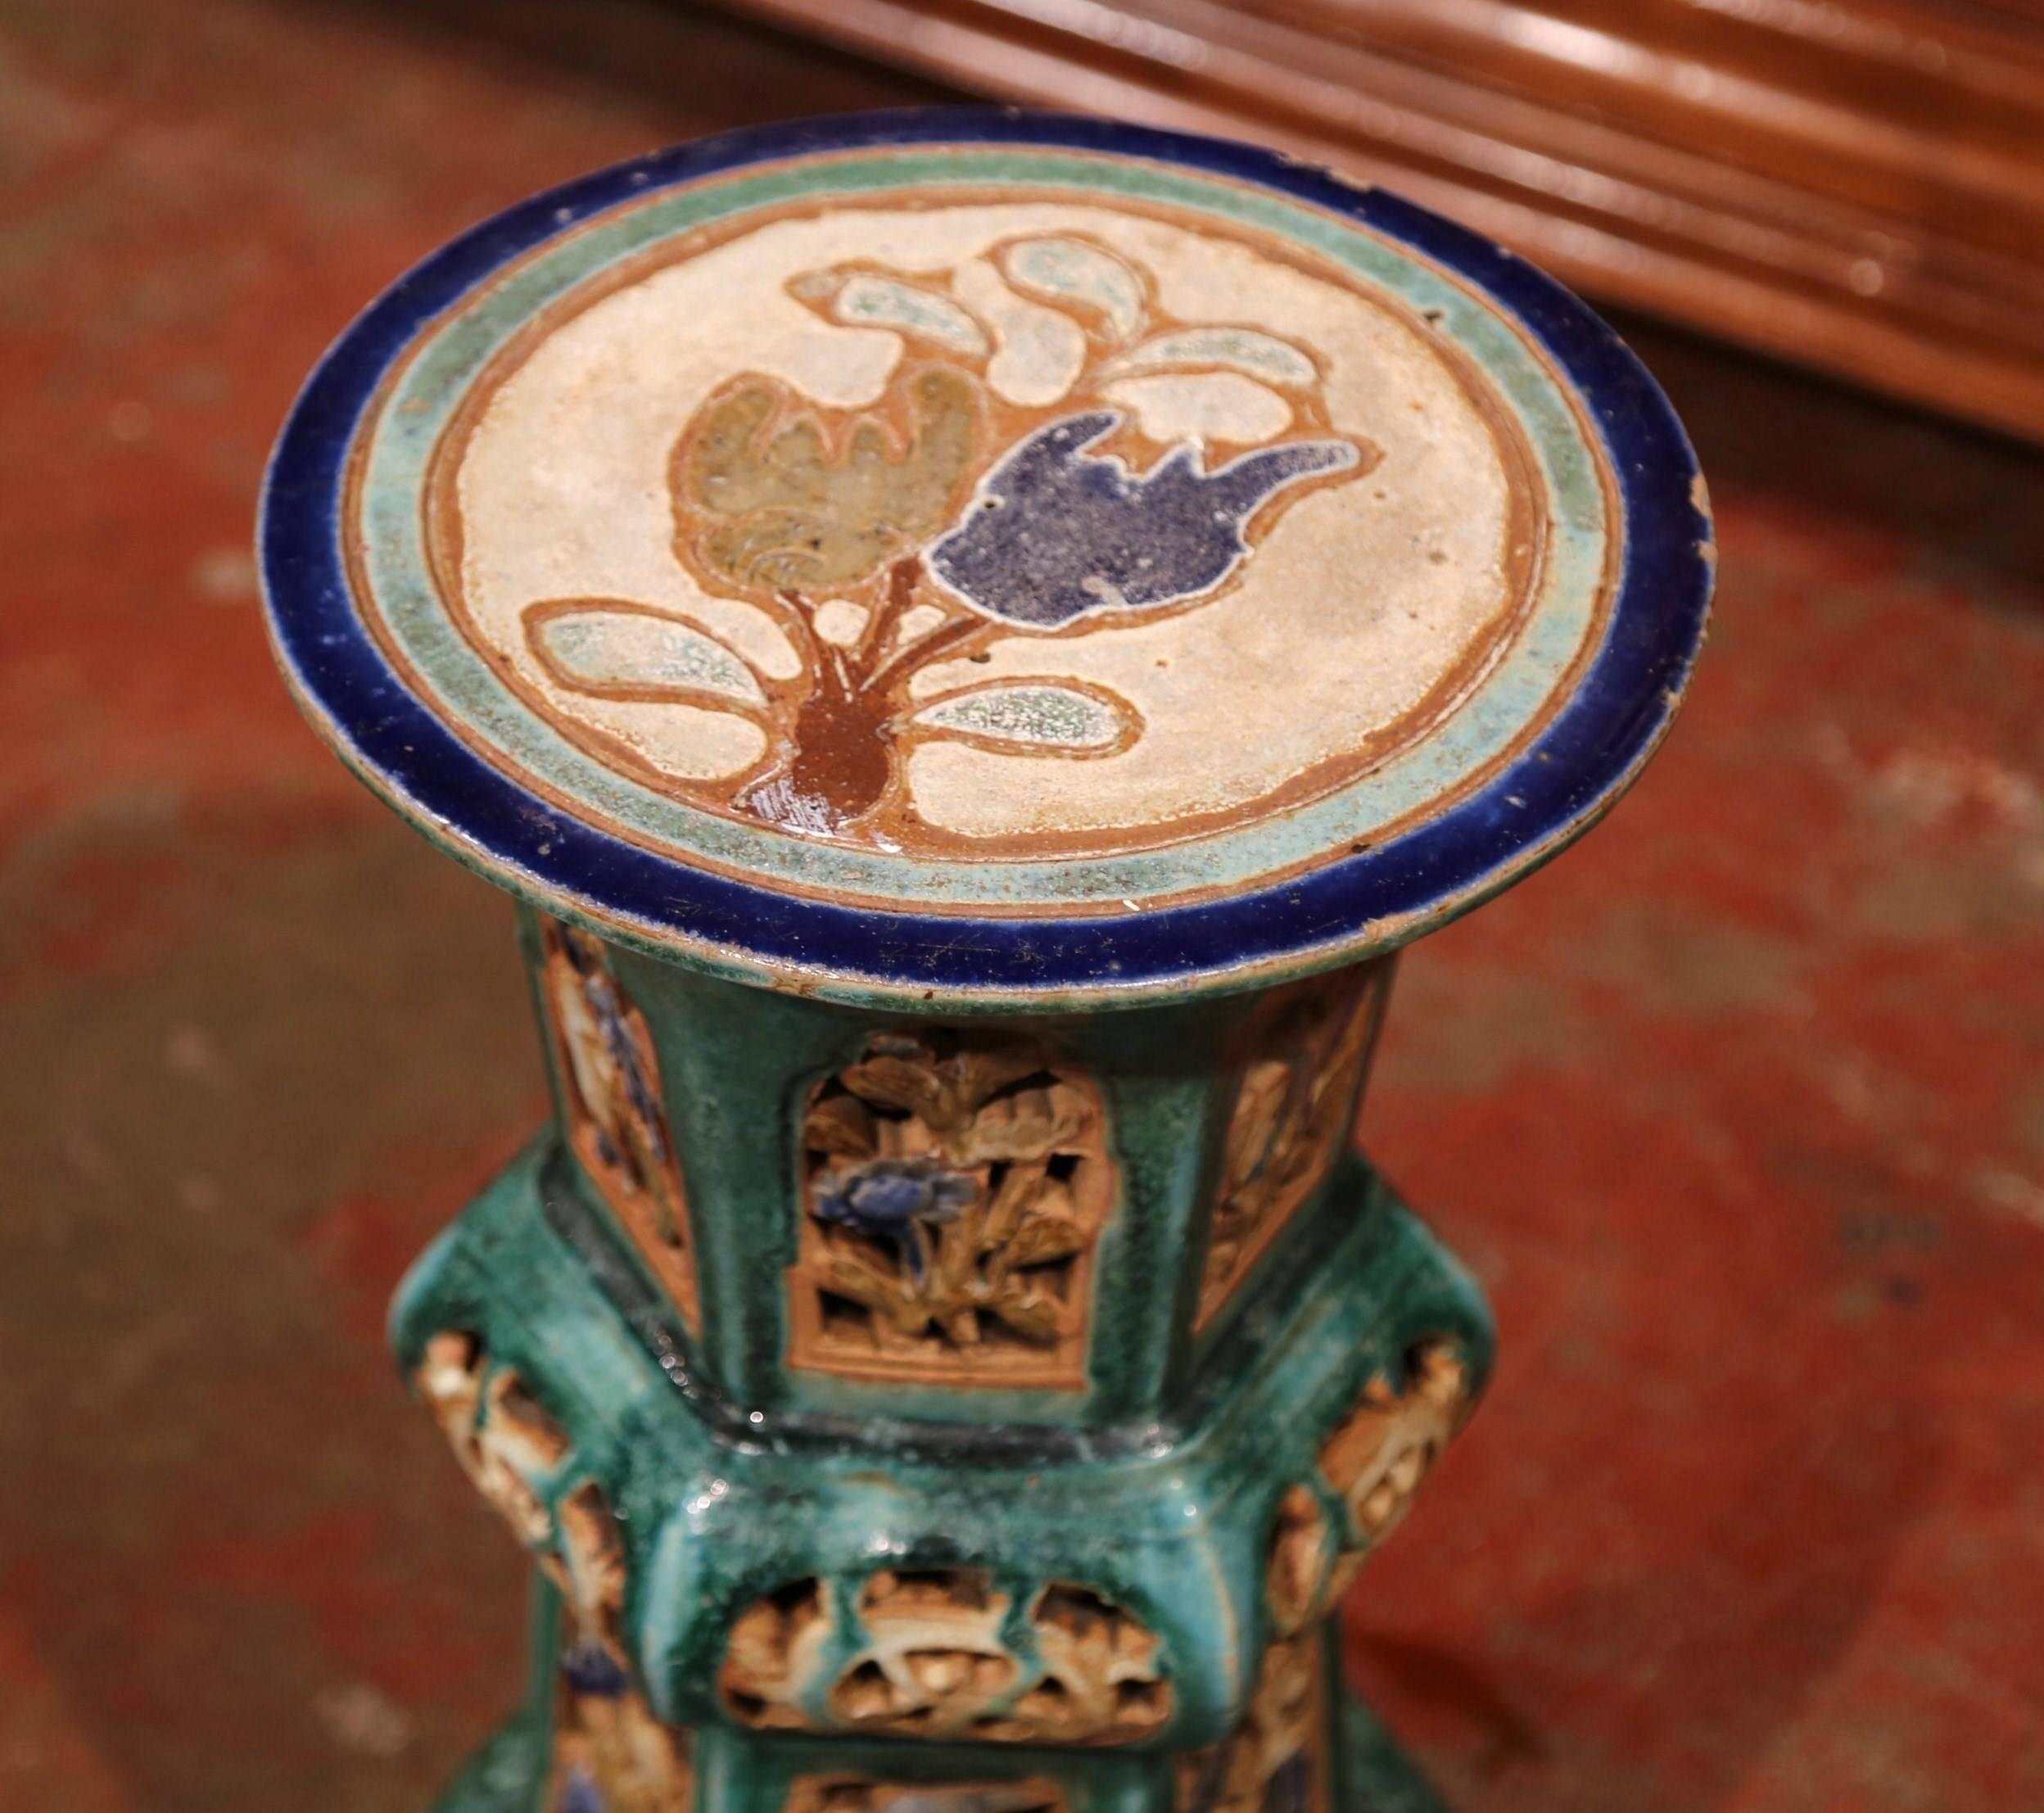 This interesting, porcelain garden seat was sculpted in France, circa 1920. In the green and brown palette, the round top has colorful painted flowers with intricate design on the base. This unique stool is in excellent condition and would make a